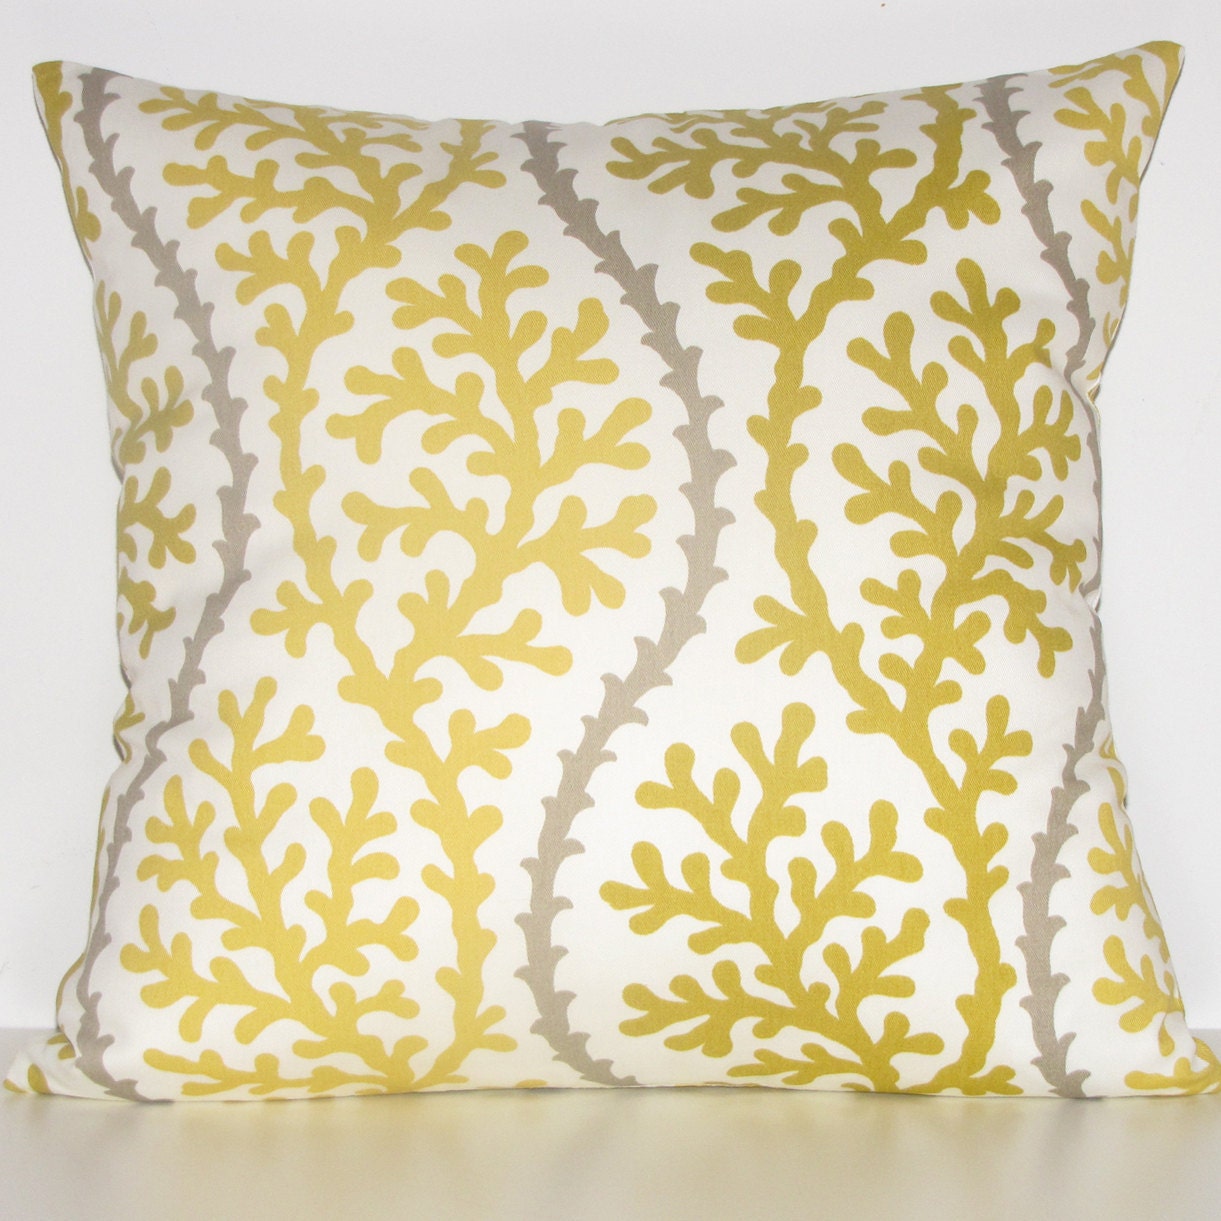 RESERVED YELLOW CORAL pillow decorative pillow by StillLifeHome